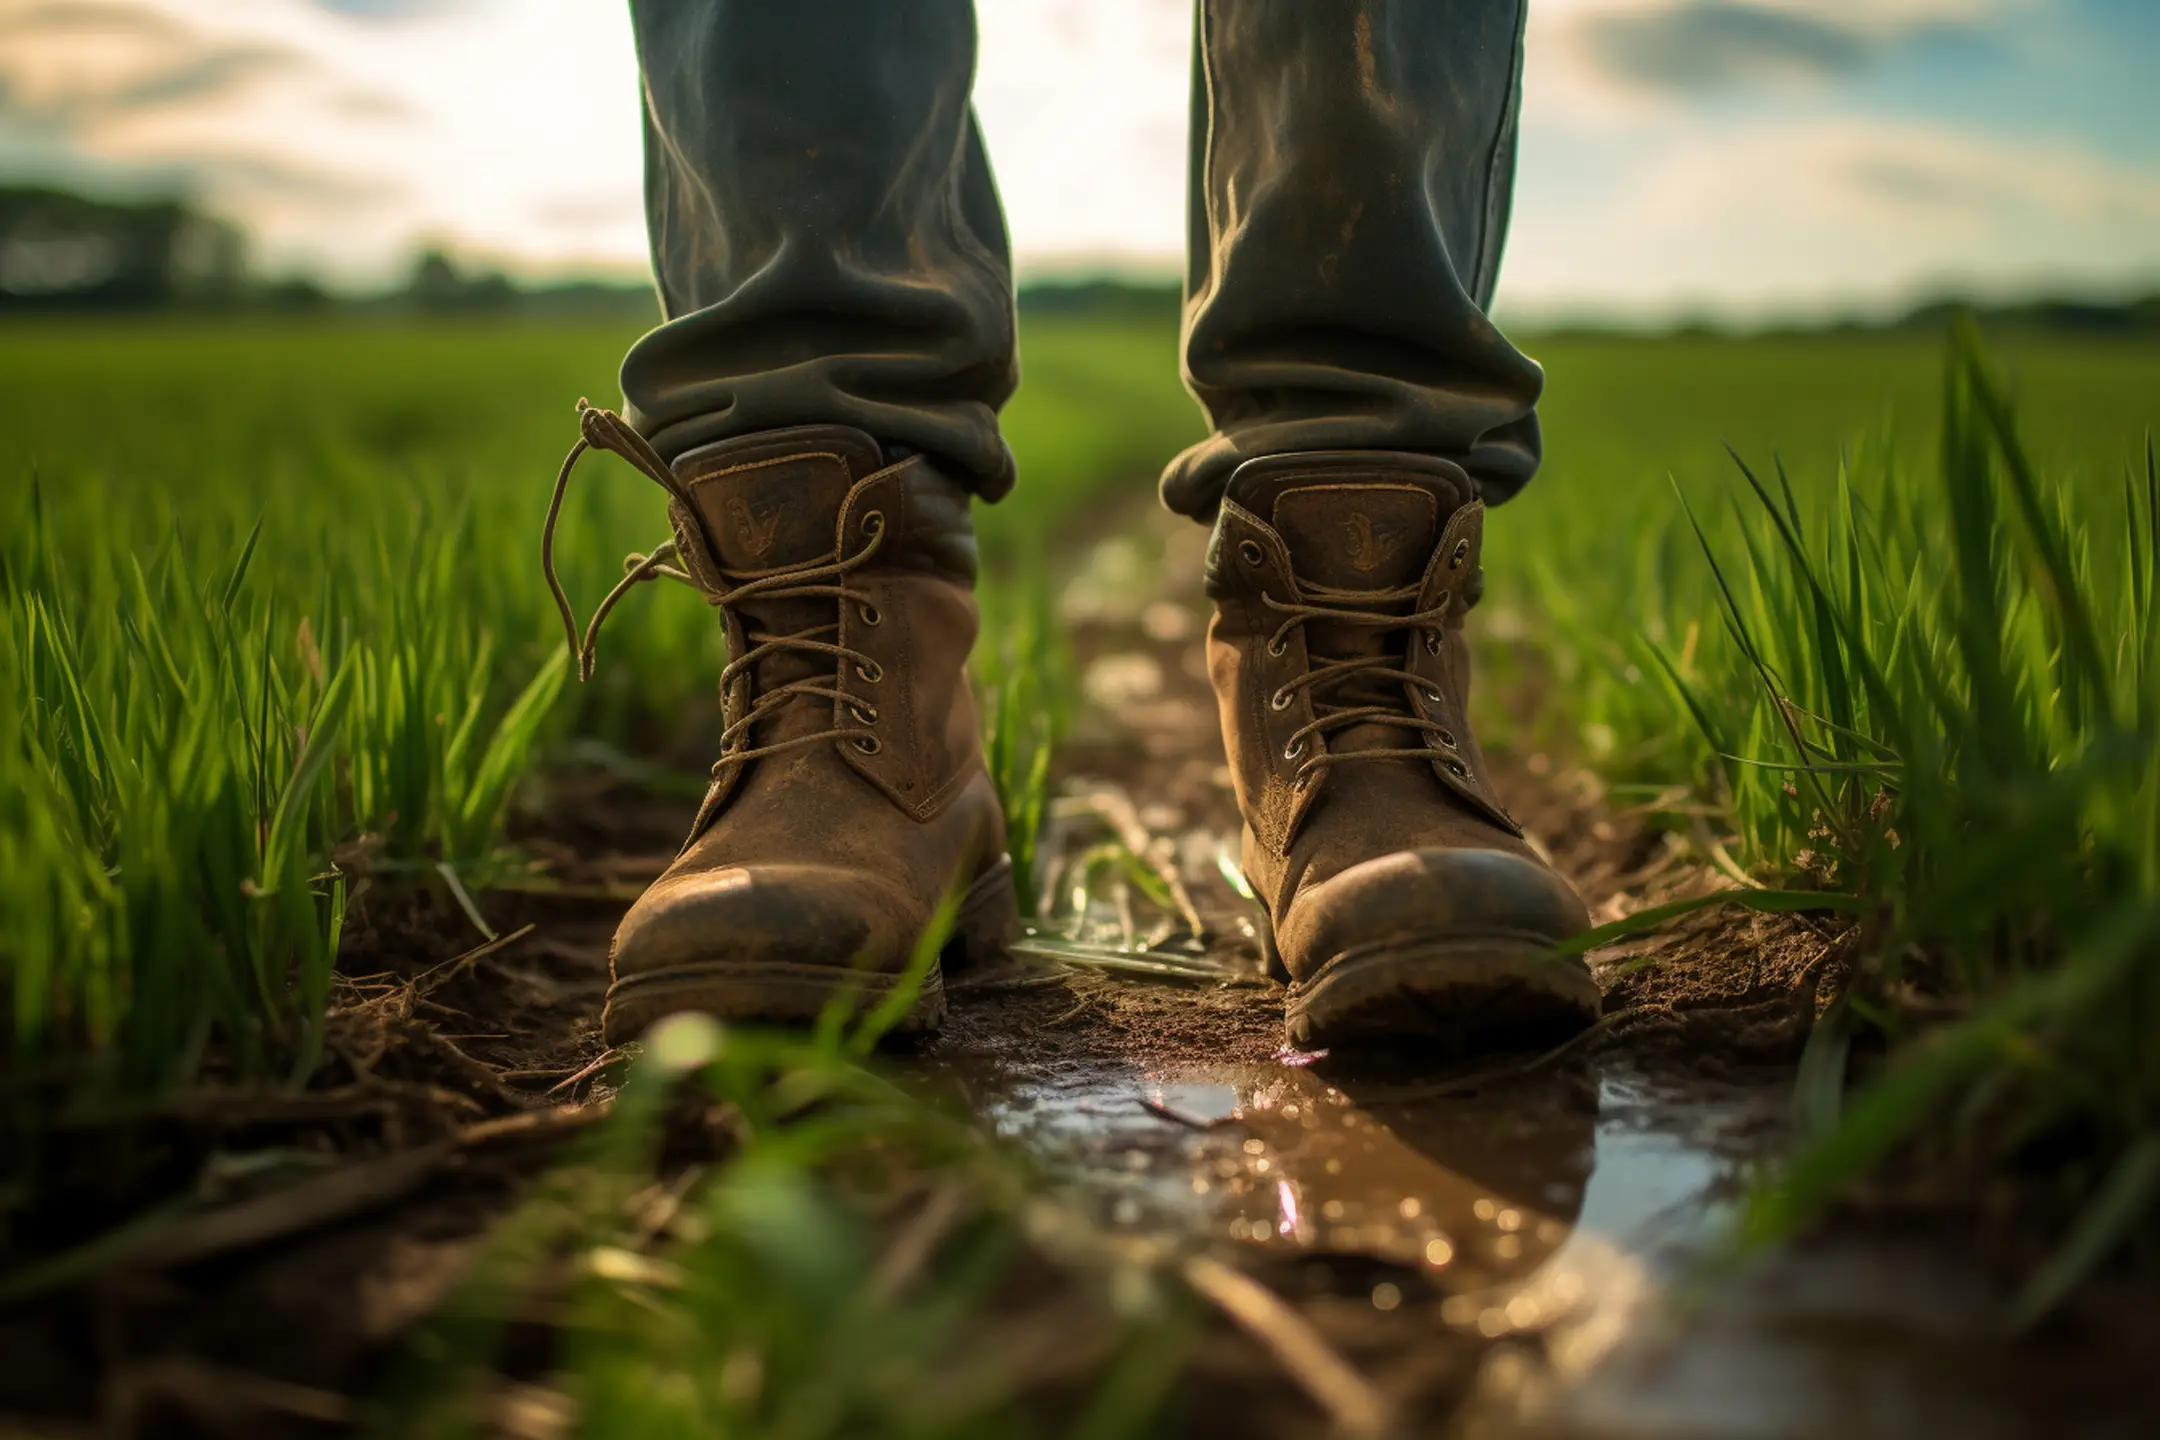 farmer in a green field with muddy boots